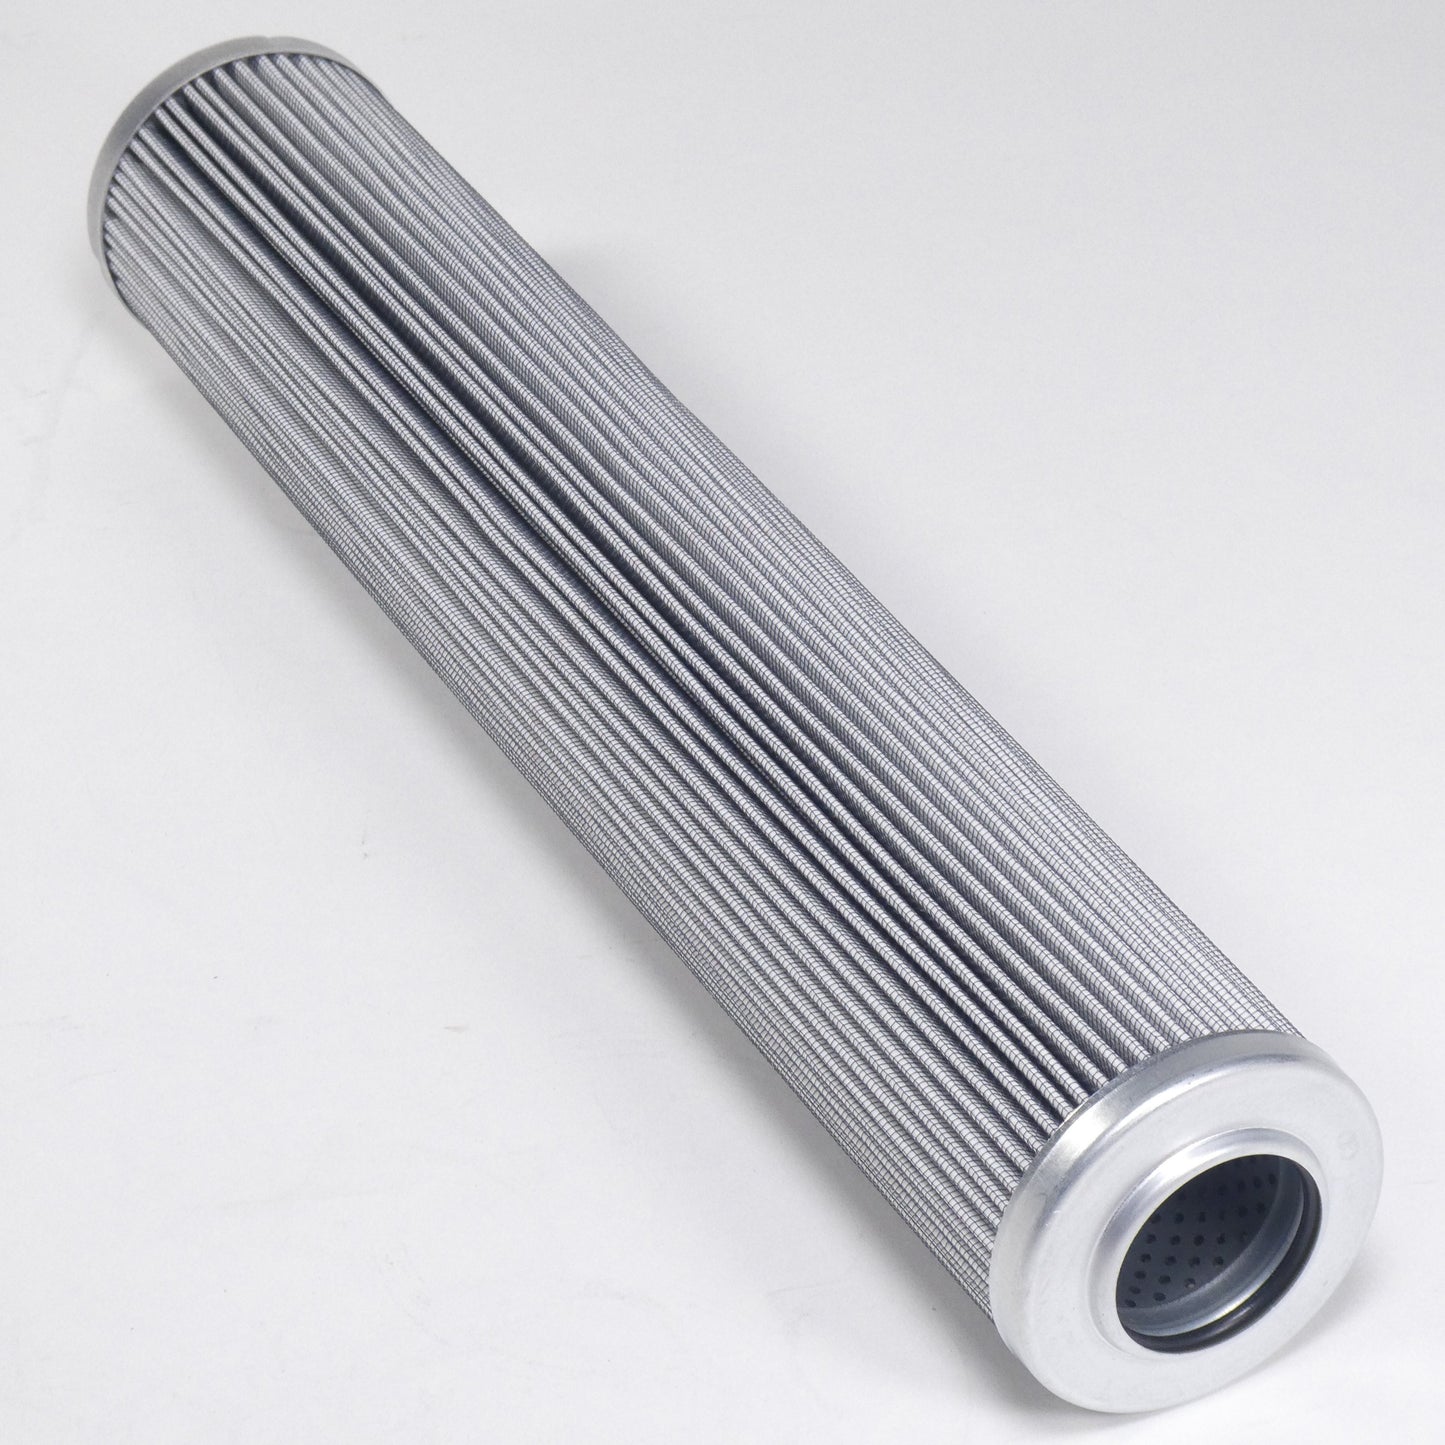 Hydrafil Replacement Filter Element for Kaydon KMP9600A06B16